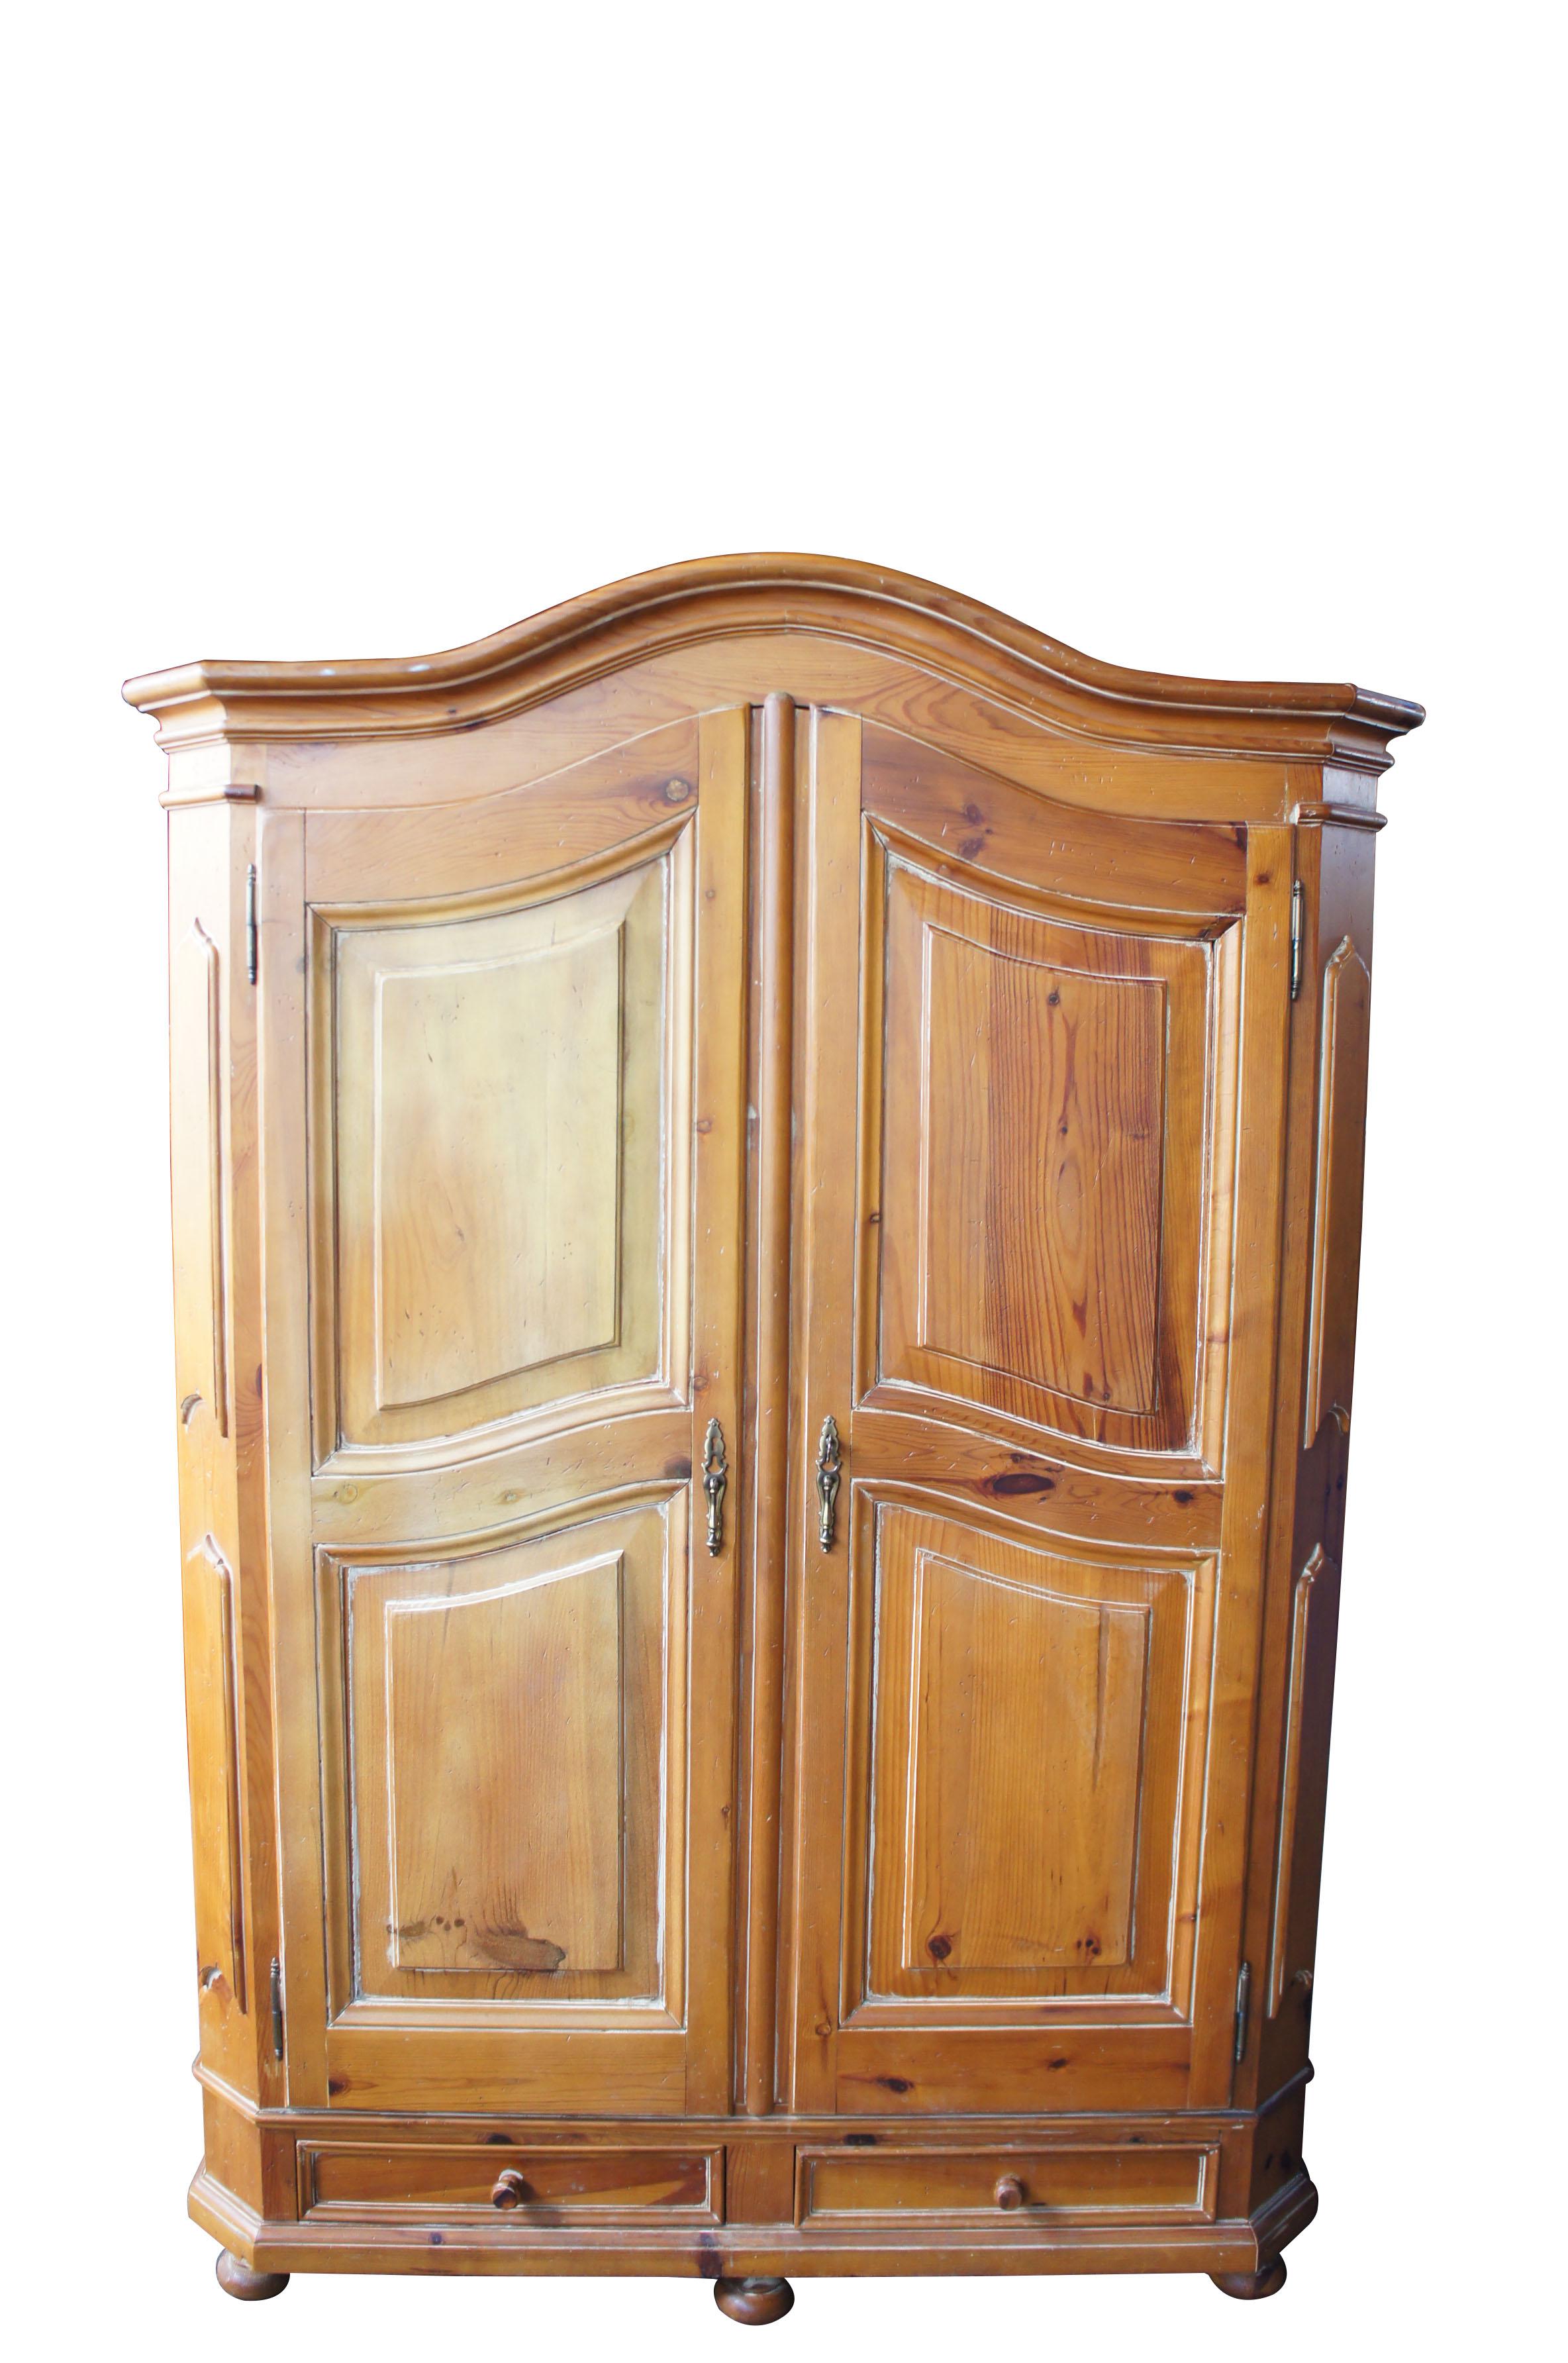 Garcia Furniture designs solid pine distressed rustic country armoire wardrobe

An exquisite armoire from Garcia Furniture designs of California. Made from a distressed pine with white wash trim. Includes 3 adjustable interior shelves, lower